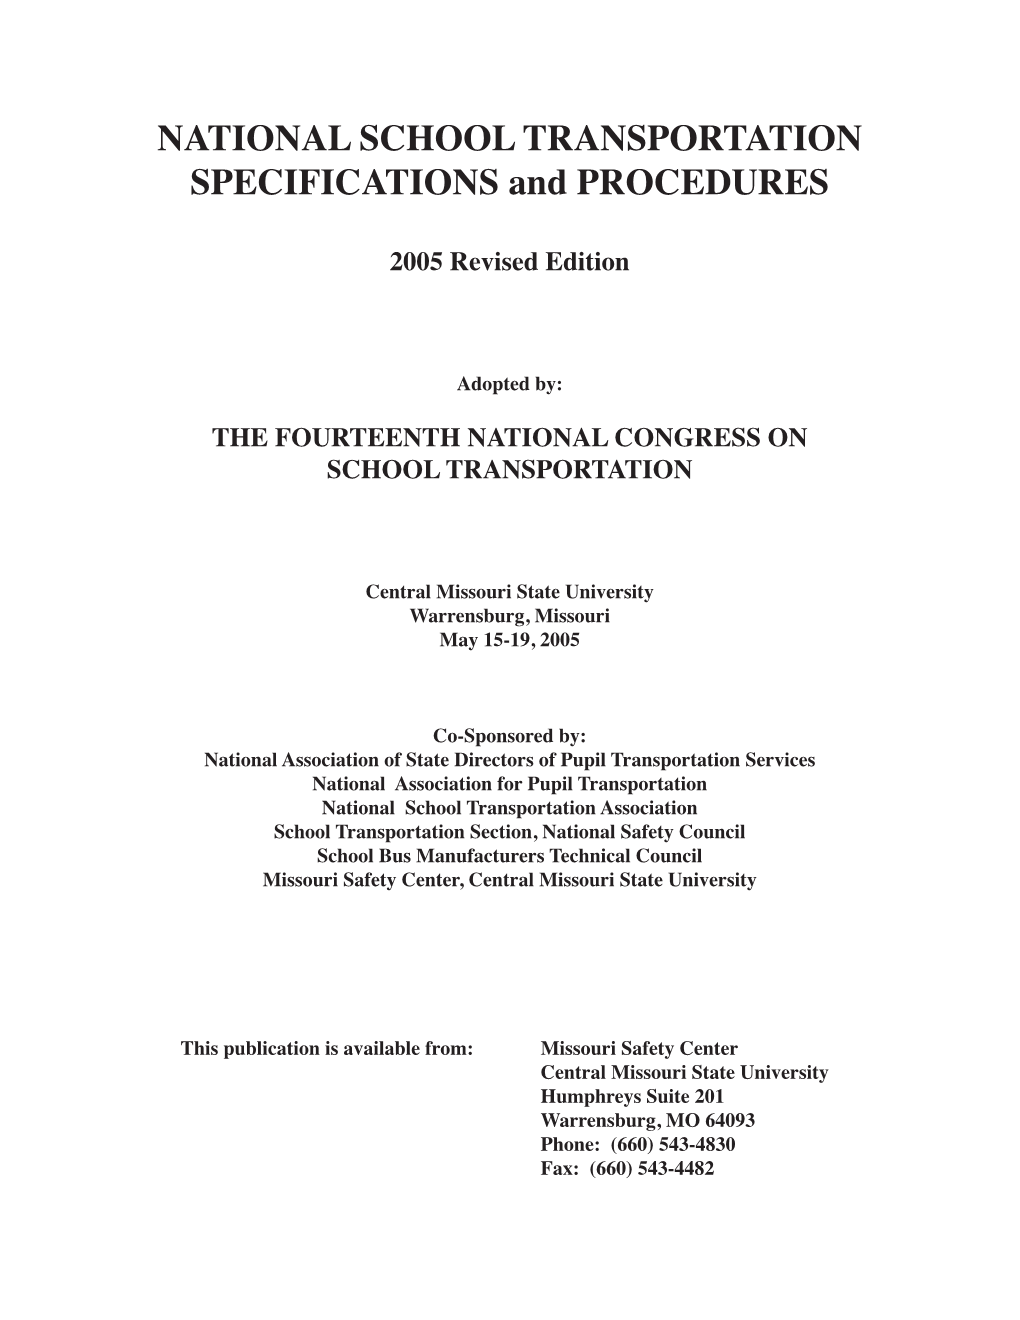 NATIONAL SCHOOL TRANSPORTATION SPECIFICATIONS and PROCEDURES